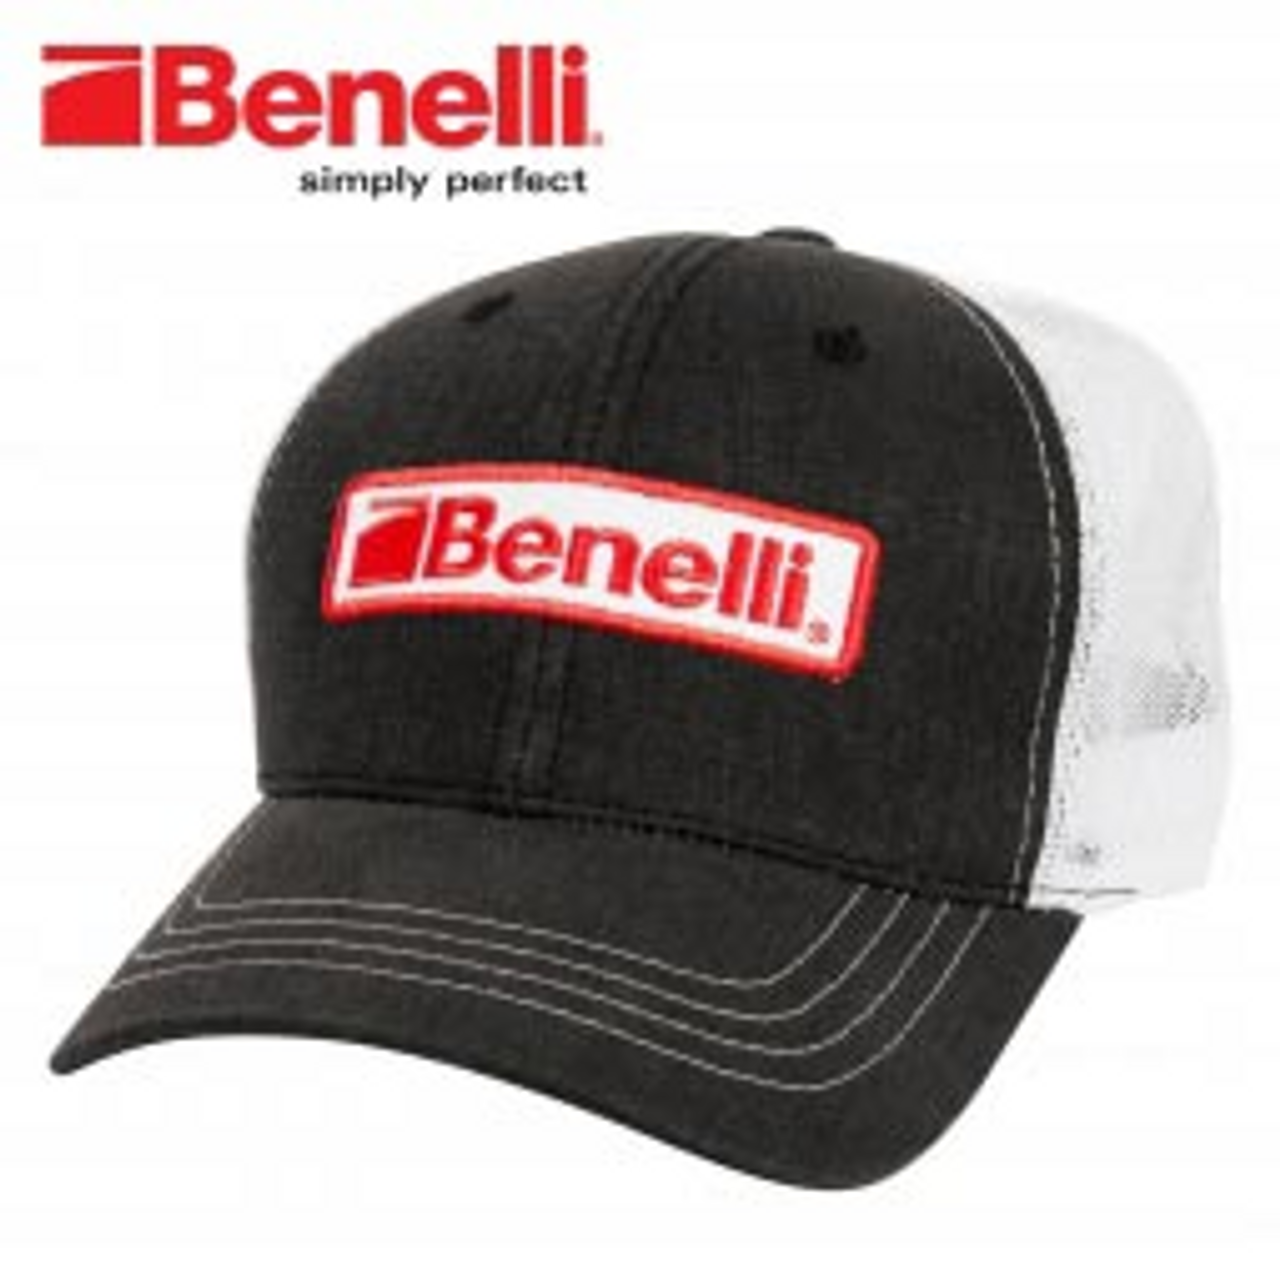 Benelli Mesh Structured Cap, Black and White